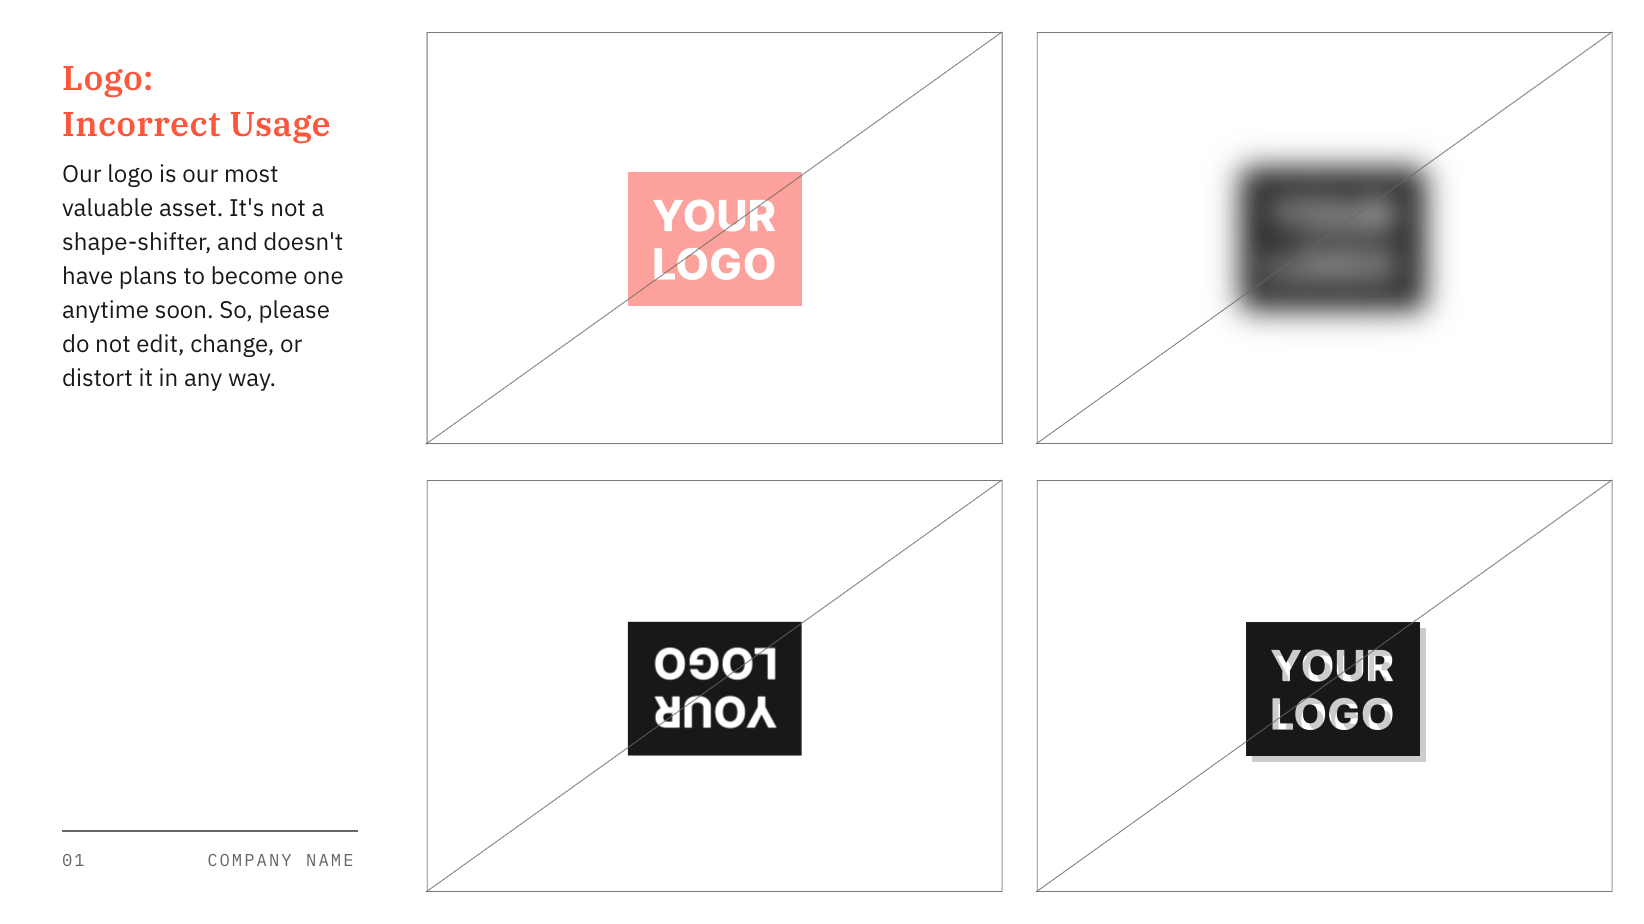 What Is a Style Guide and How to Create One For Your Brand? [Template and  Examples Inside]